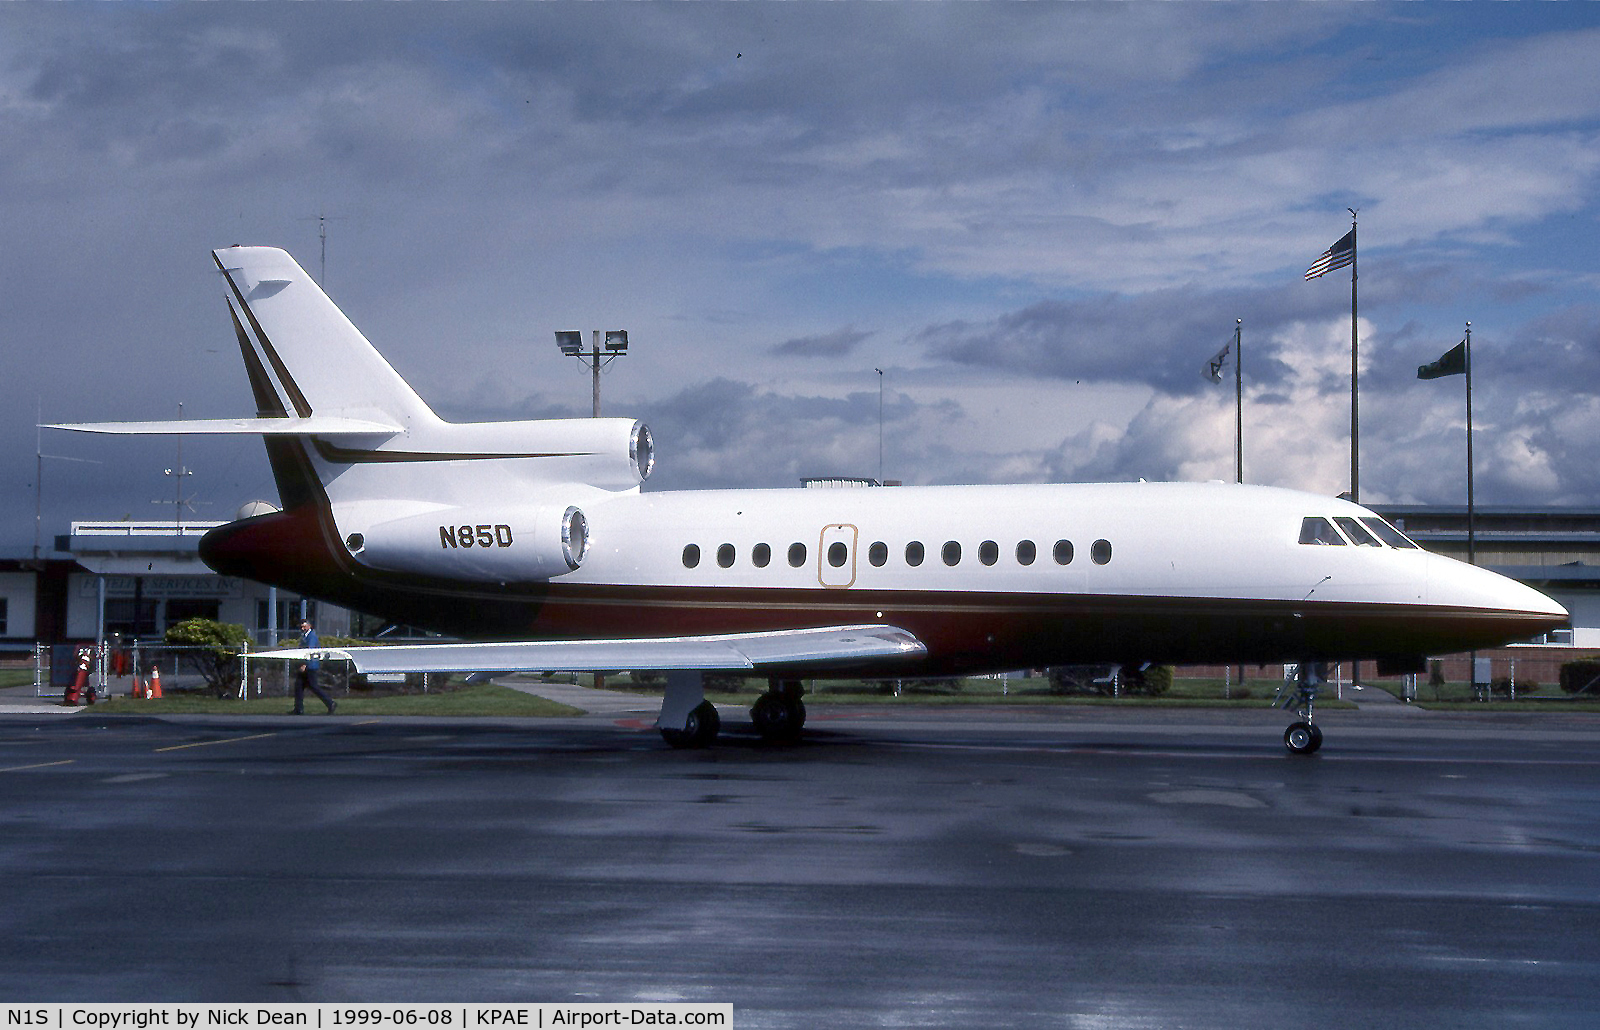 N1S, 1987 Dassault Falcon 900 C/N 28, Seen here as N85D of Dole now replaced by a Globex this airframe is currently registered N1S as posted